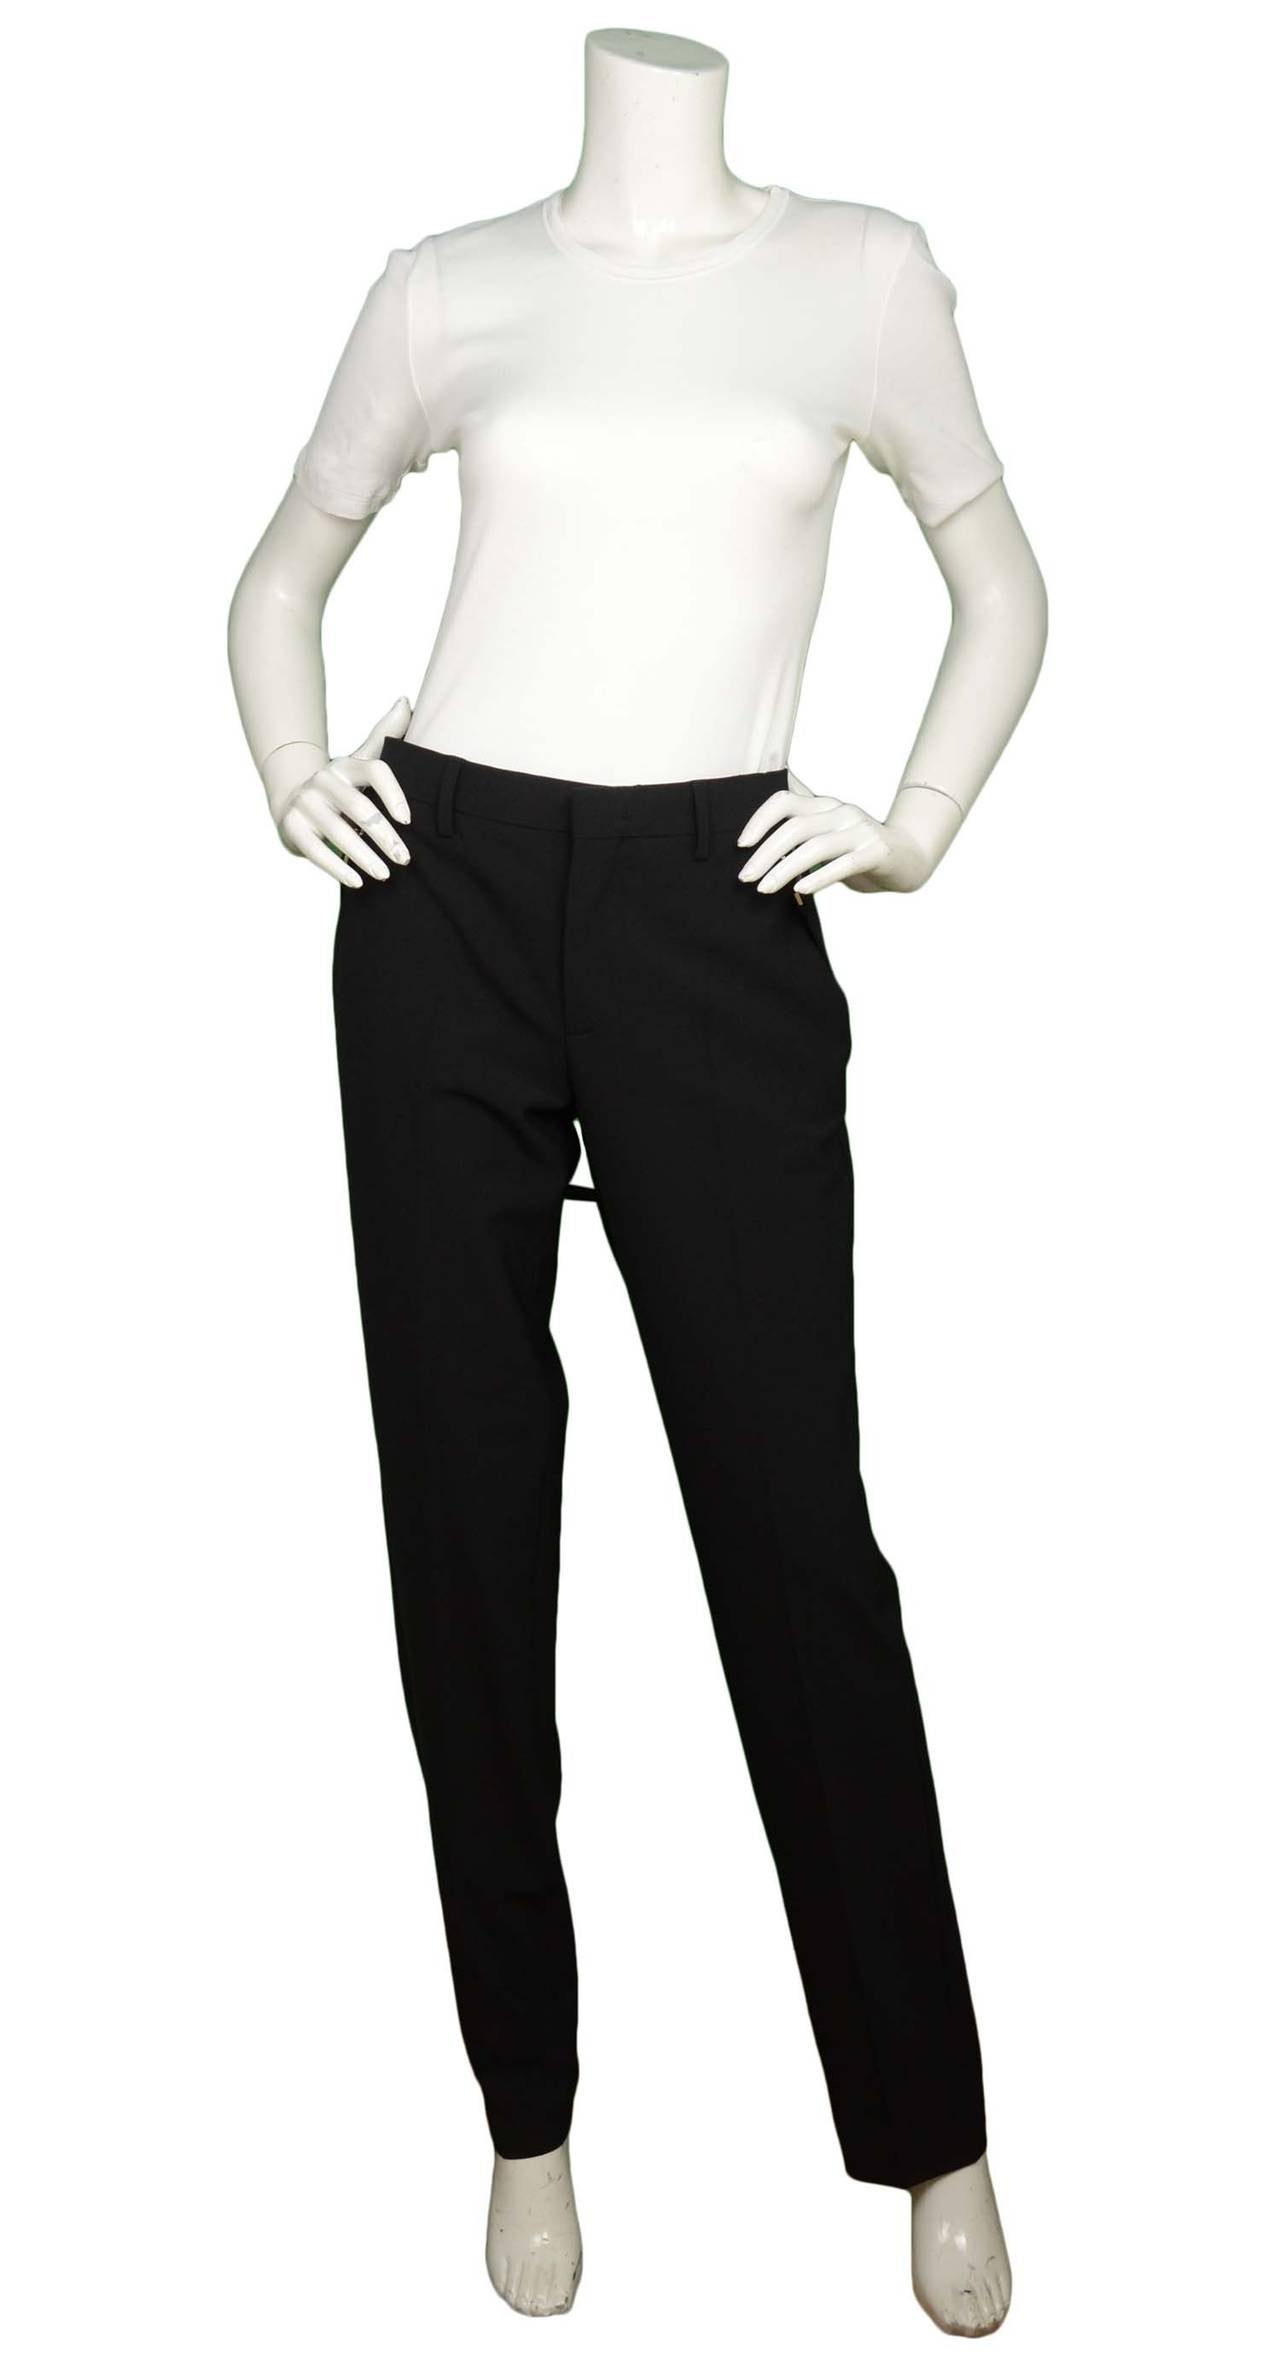 GIVENCHY Black NWT Trousers W/ Belt Detail RT $1250
Made in: Italy
Color: Black
Composition: 53% Polyester, 43% Wool, 4% Elastane
Lining: Black 100% Vicose
Closure/opening: Zipper with hook clasp
Exterior Pockets: Two pockets, one at each hip